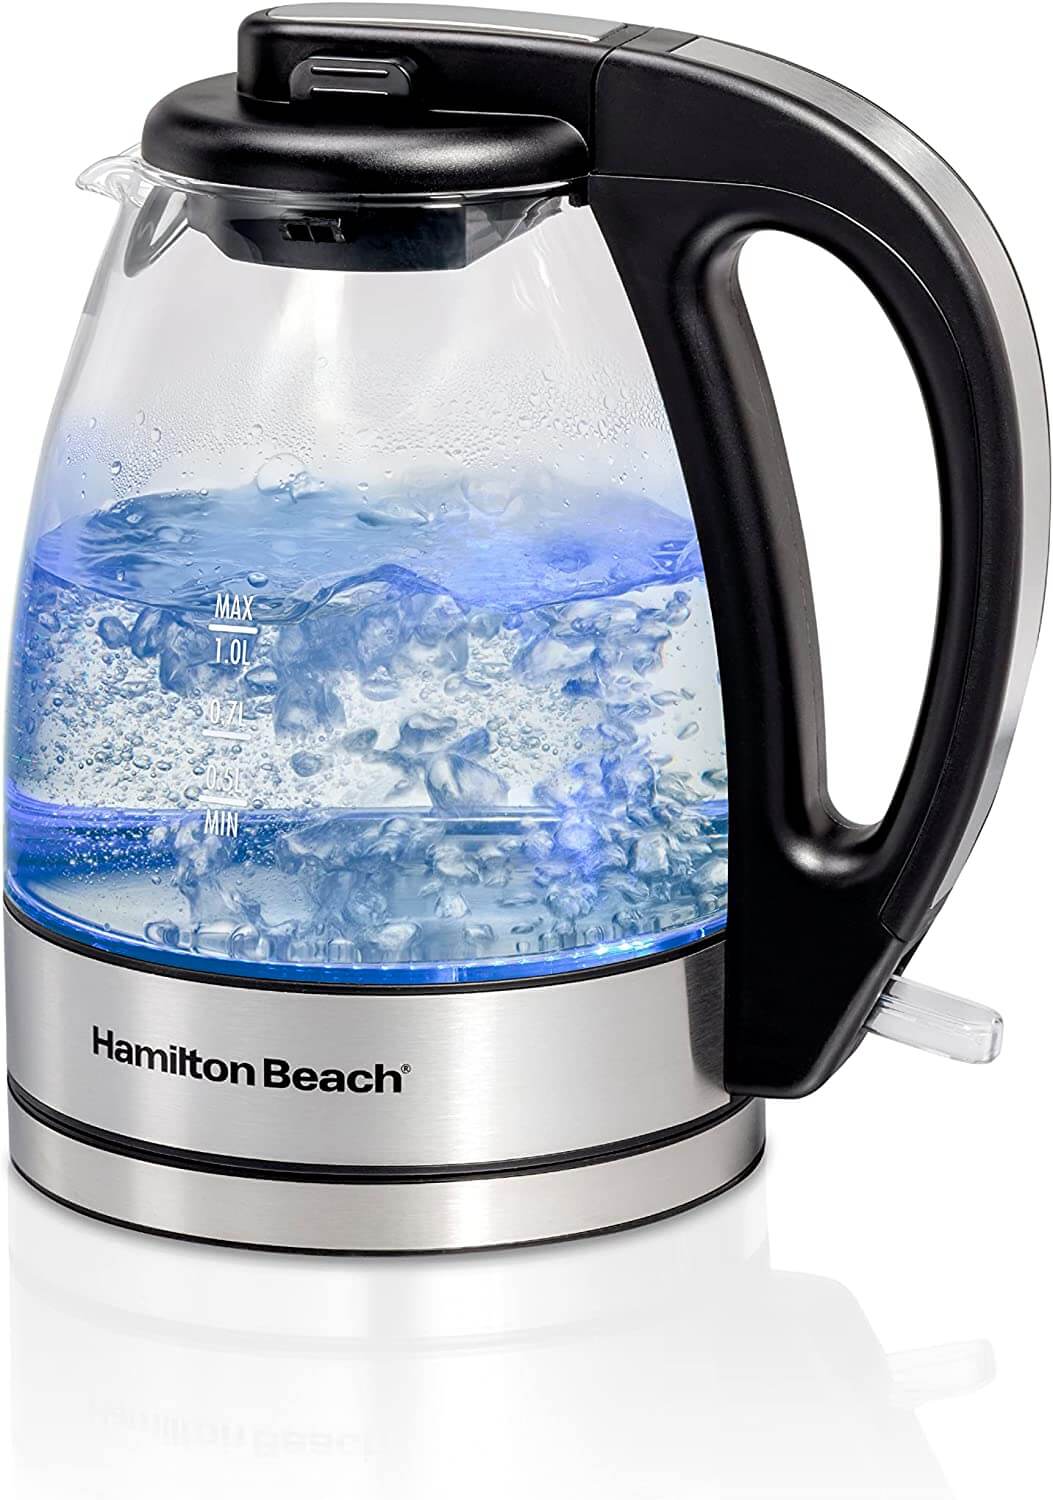 clear glass electric tea kettle with handle and bubbling water inside